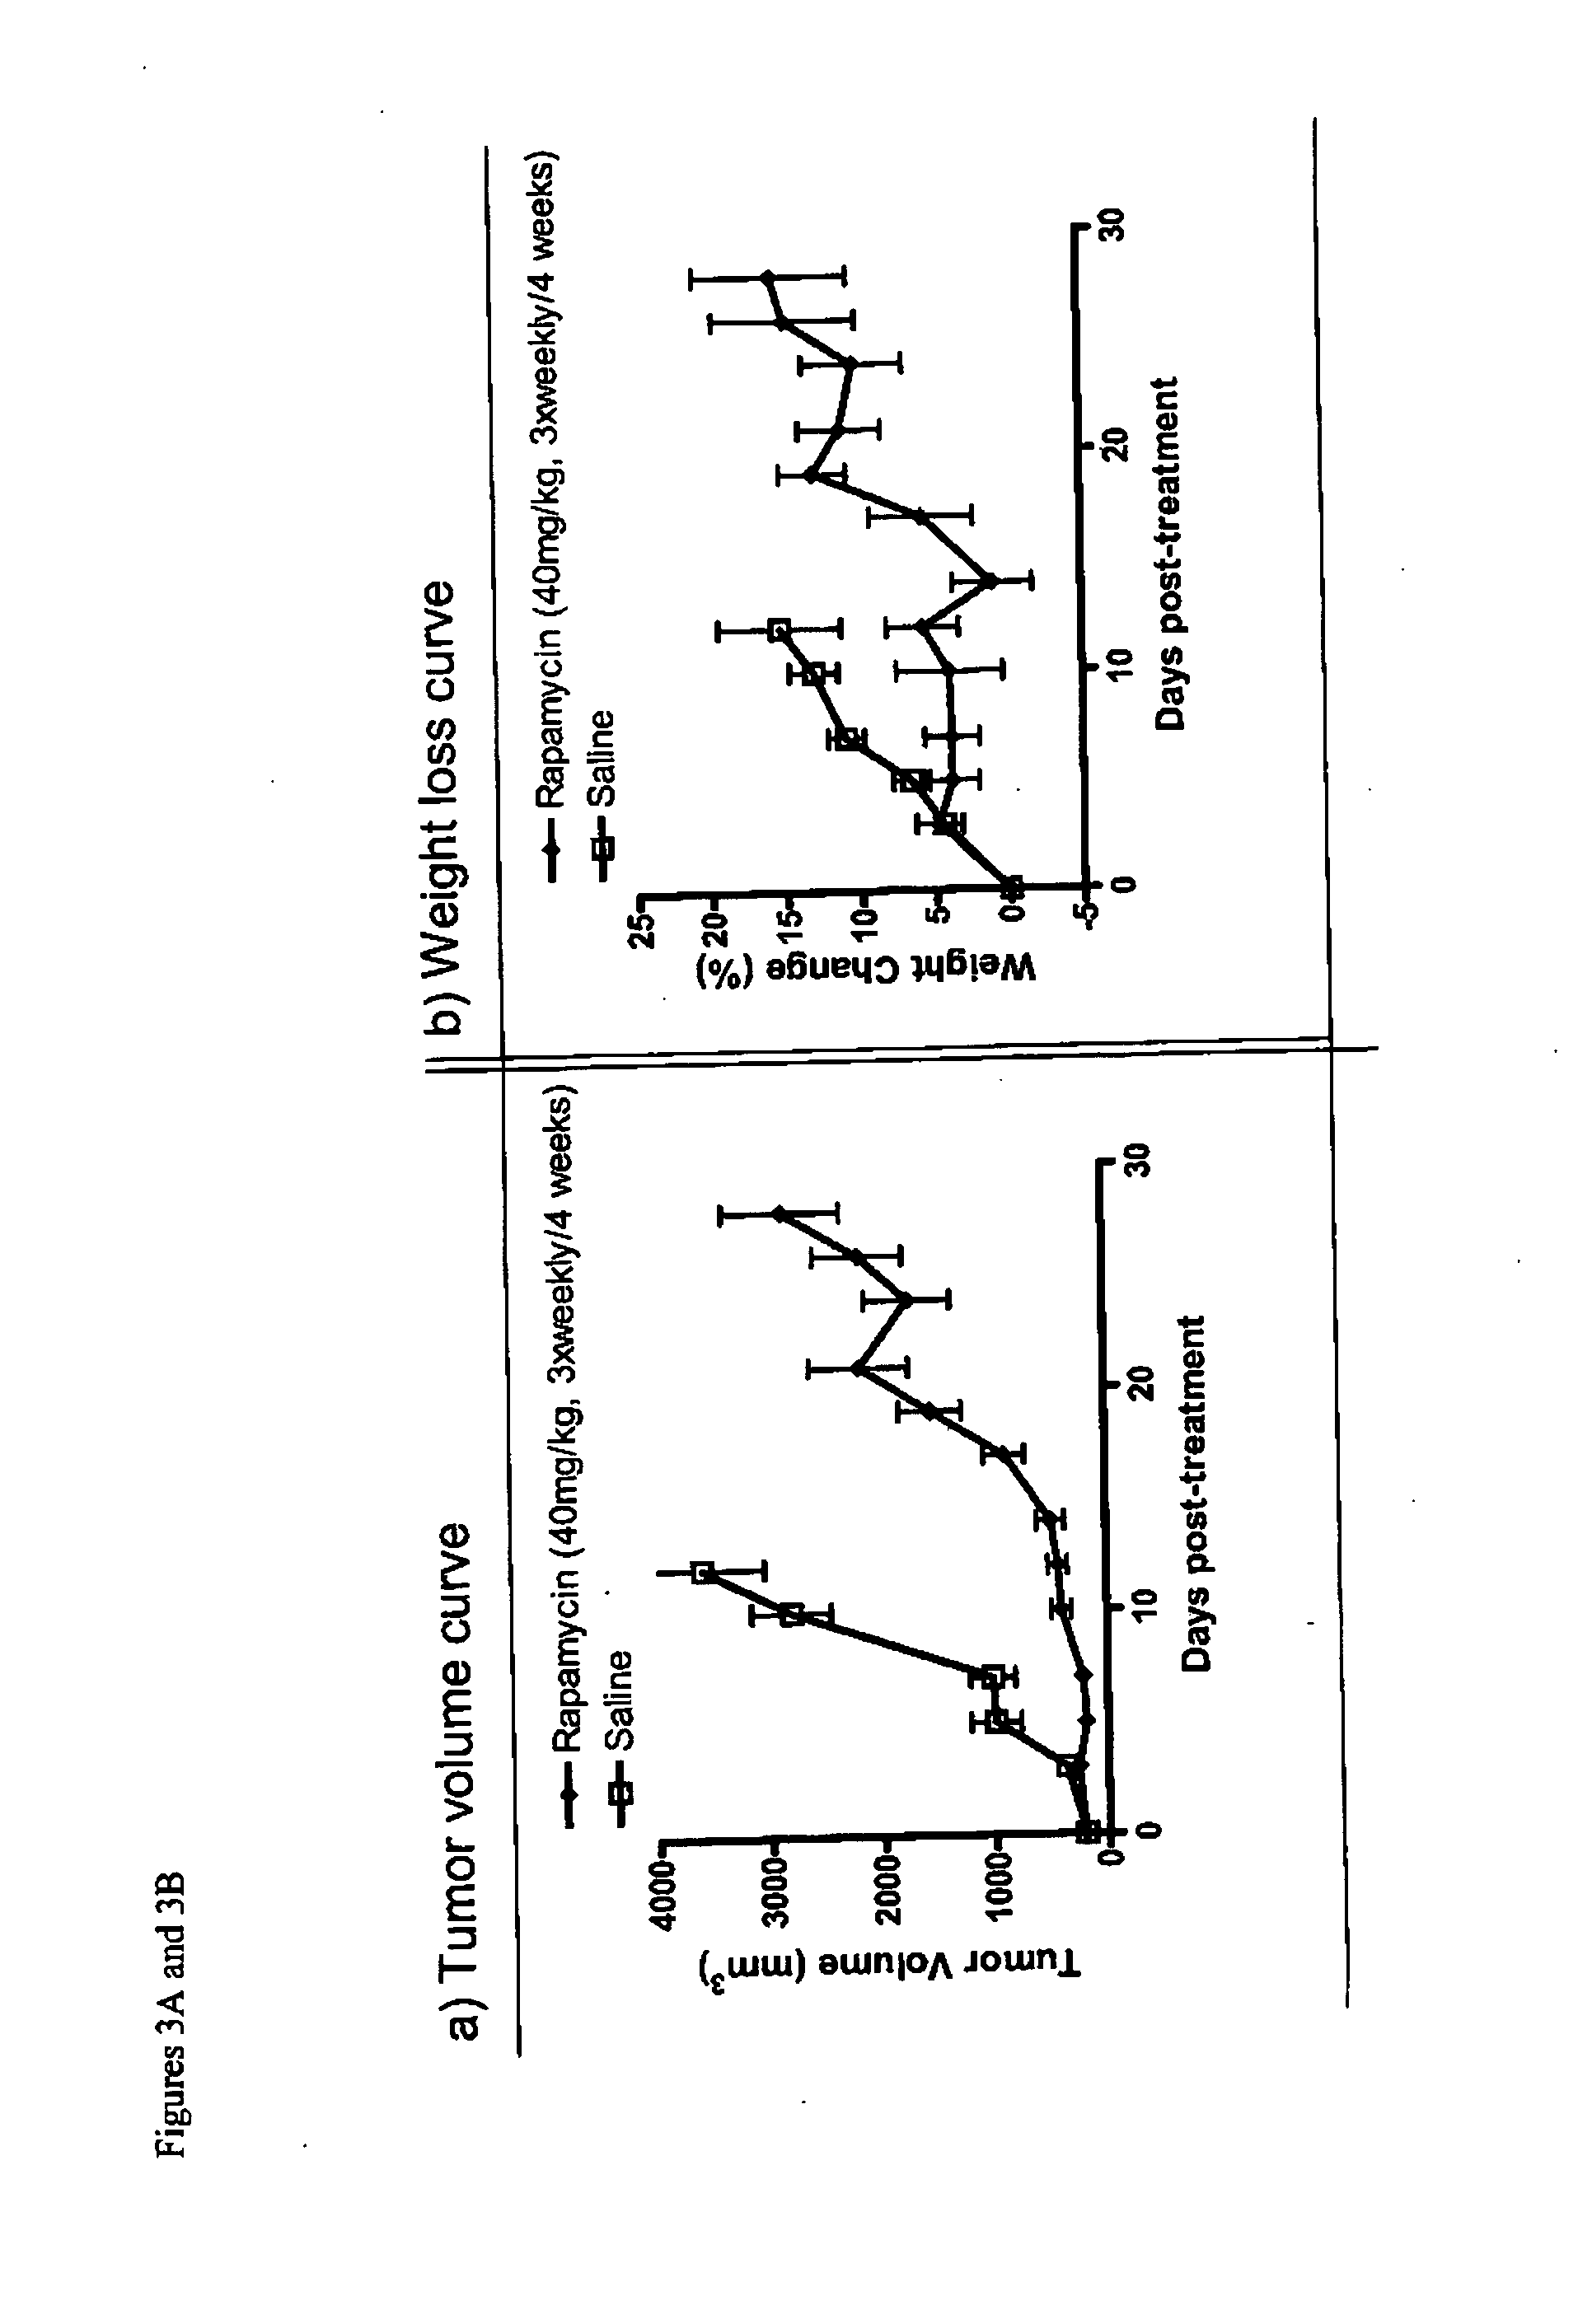 Nanoparticle comprising rapamycin and albumin as anticancer agent